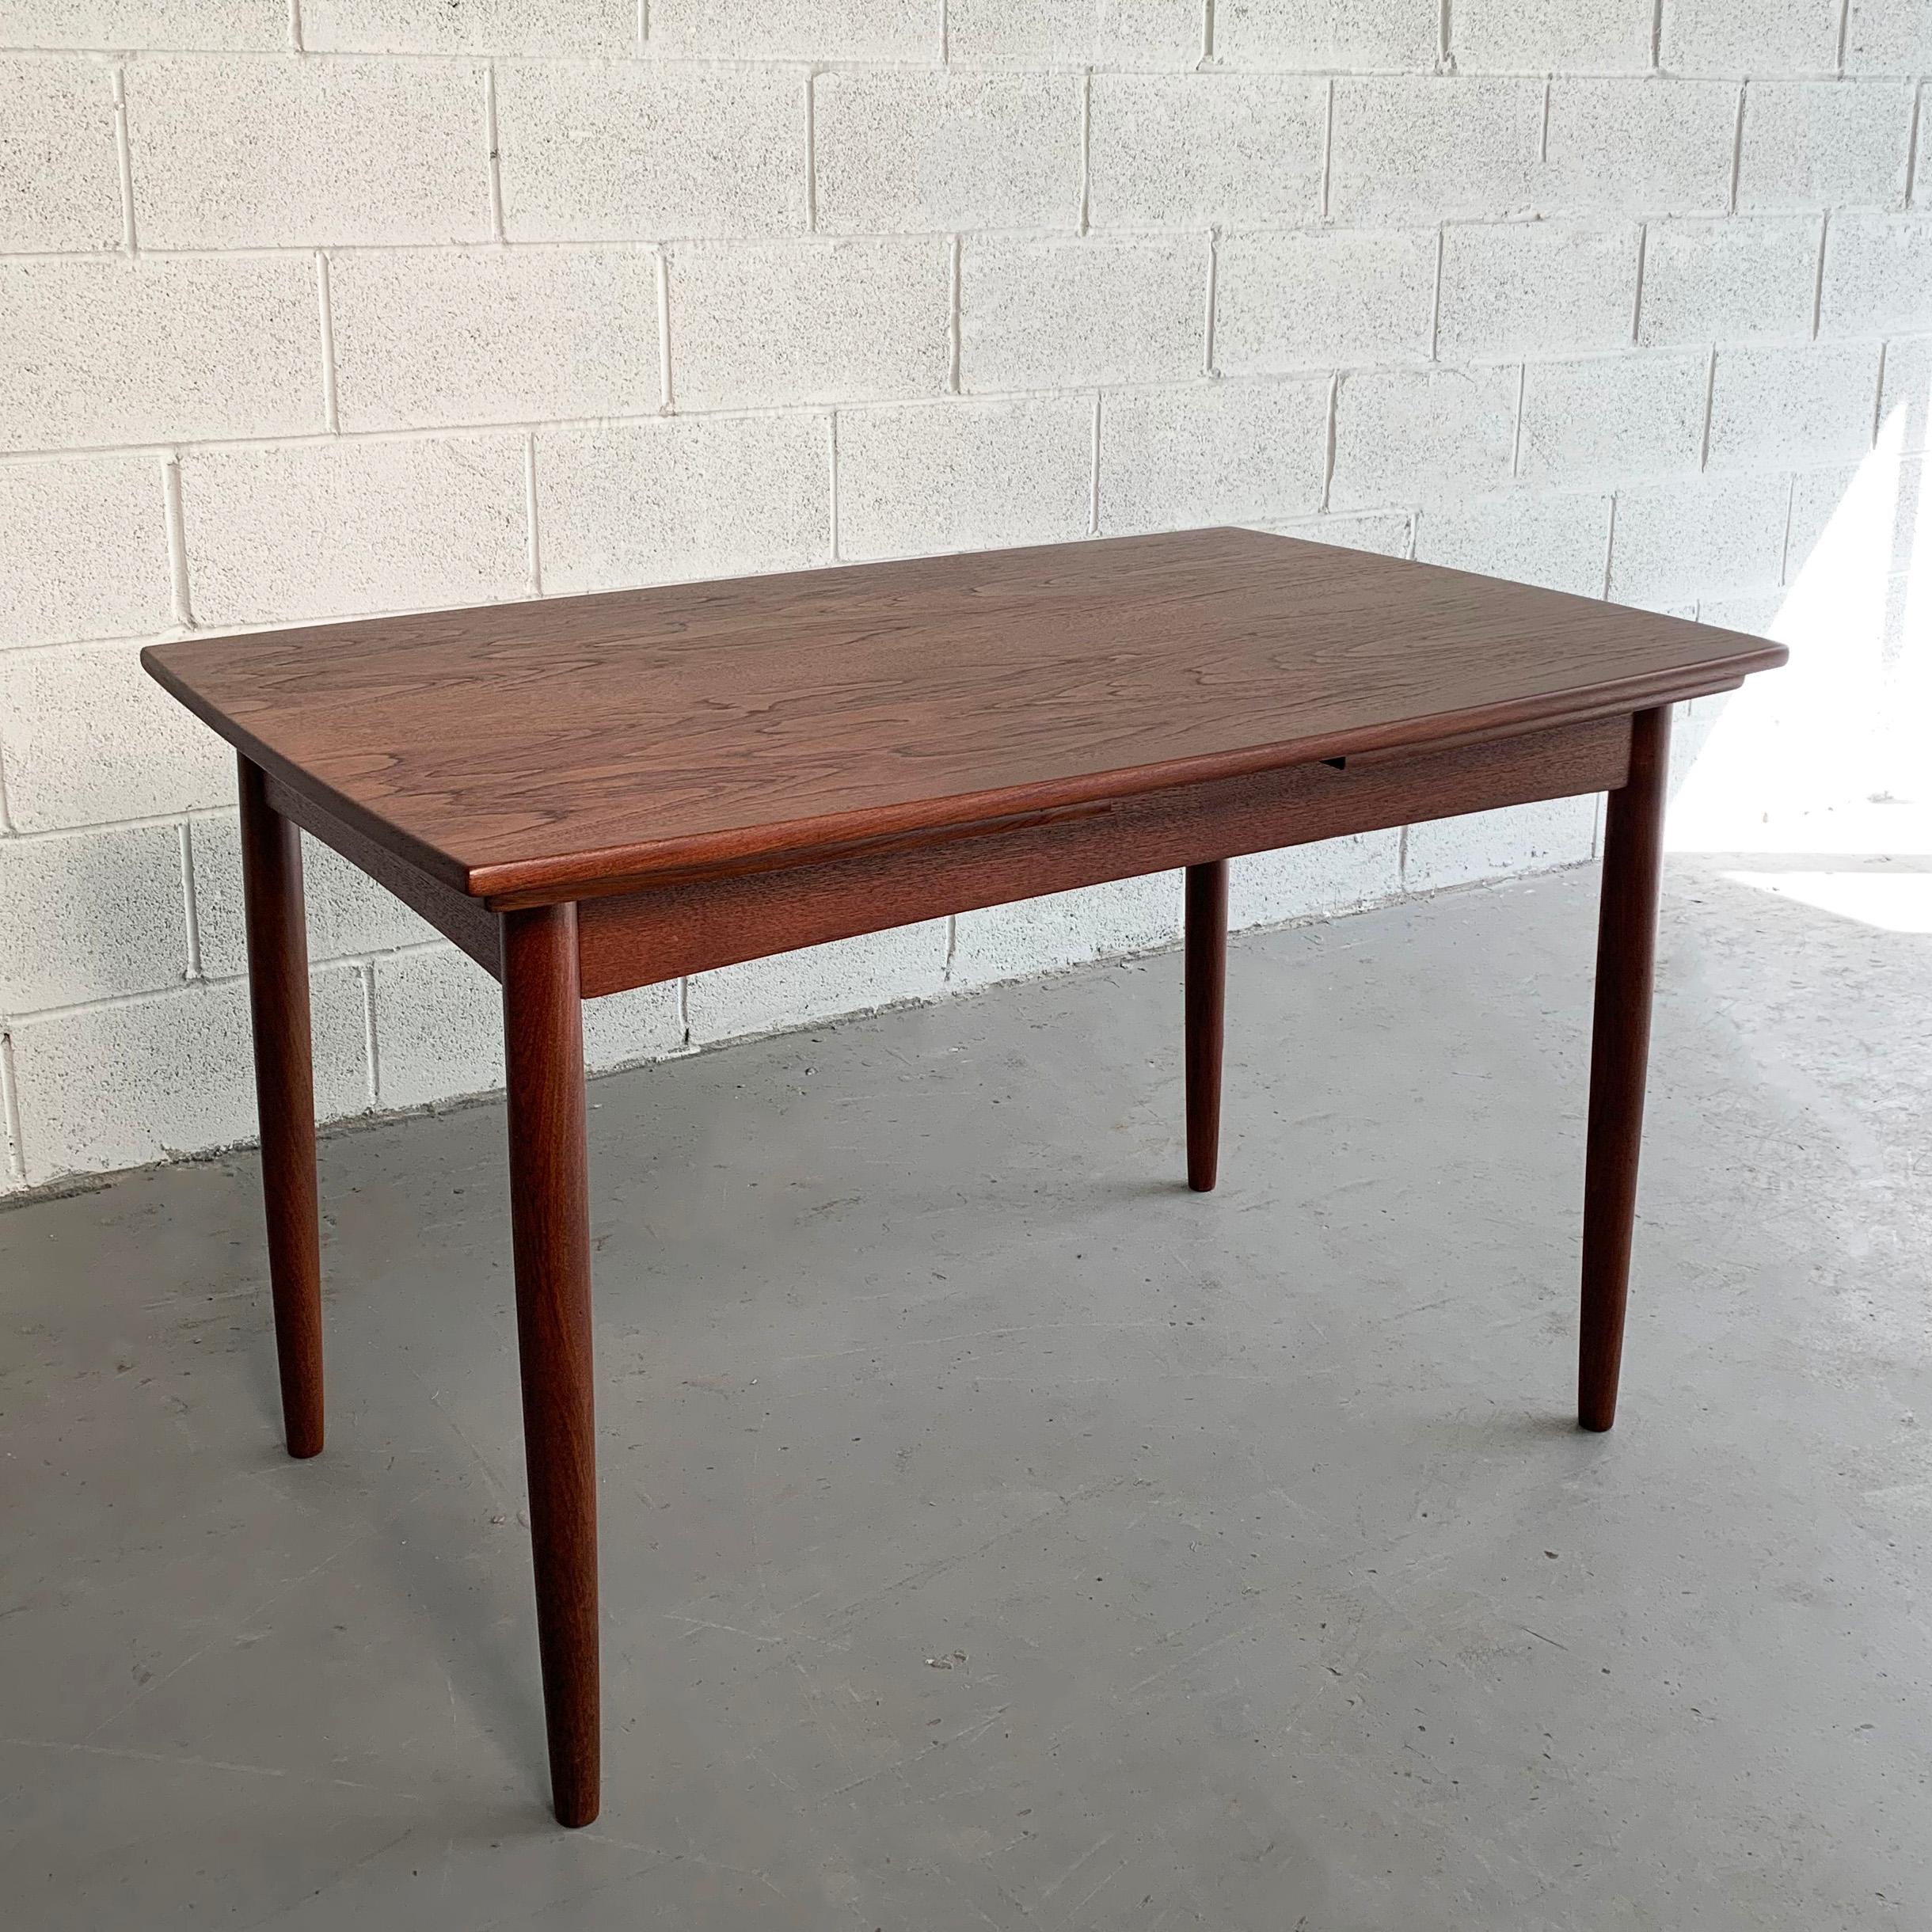 Danish modern, teak dining table features two 18 inch extension leaves that are stored underneath it's top that bring the table to 83 inches wide. The apron around the table is at 24 inches height.